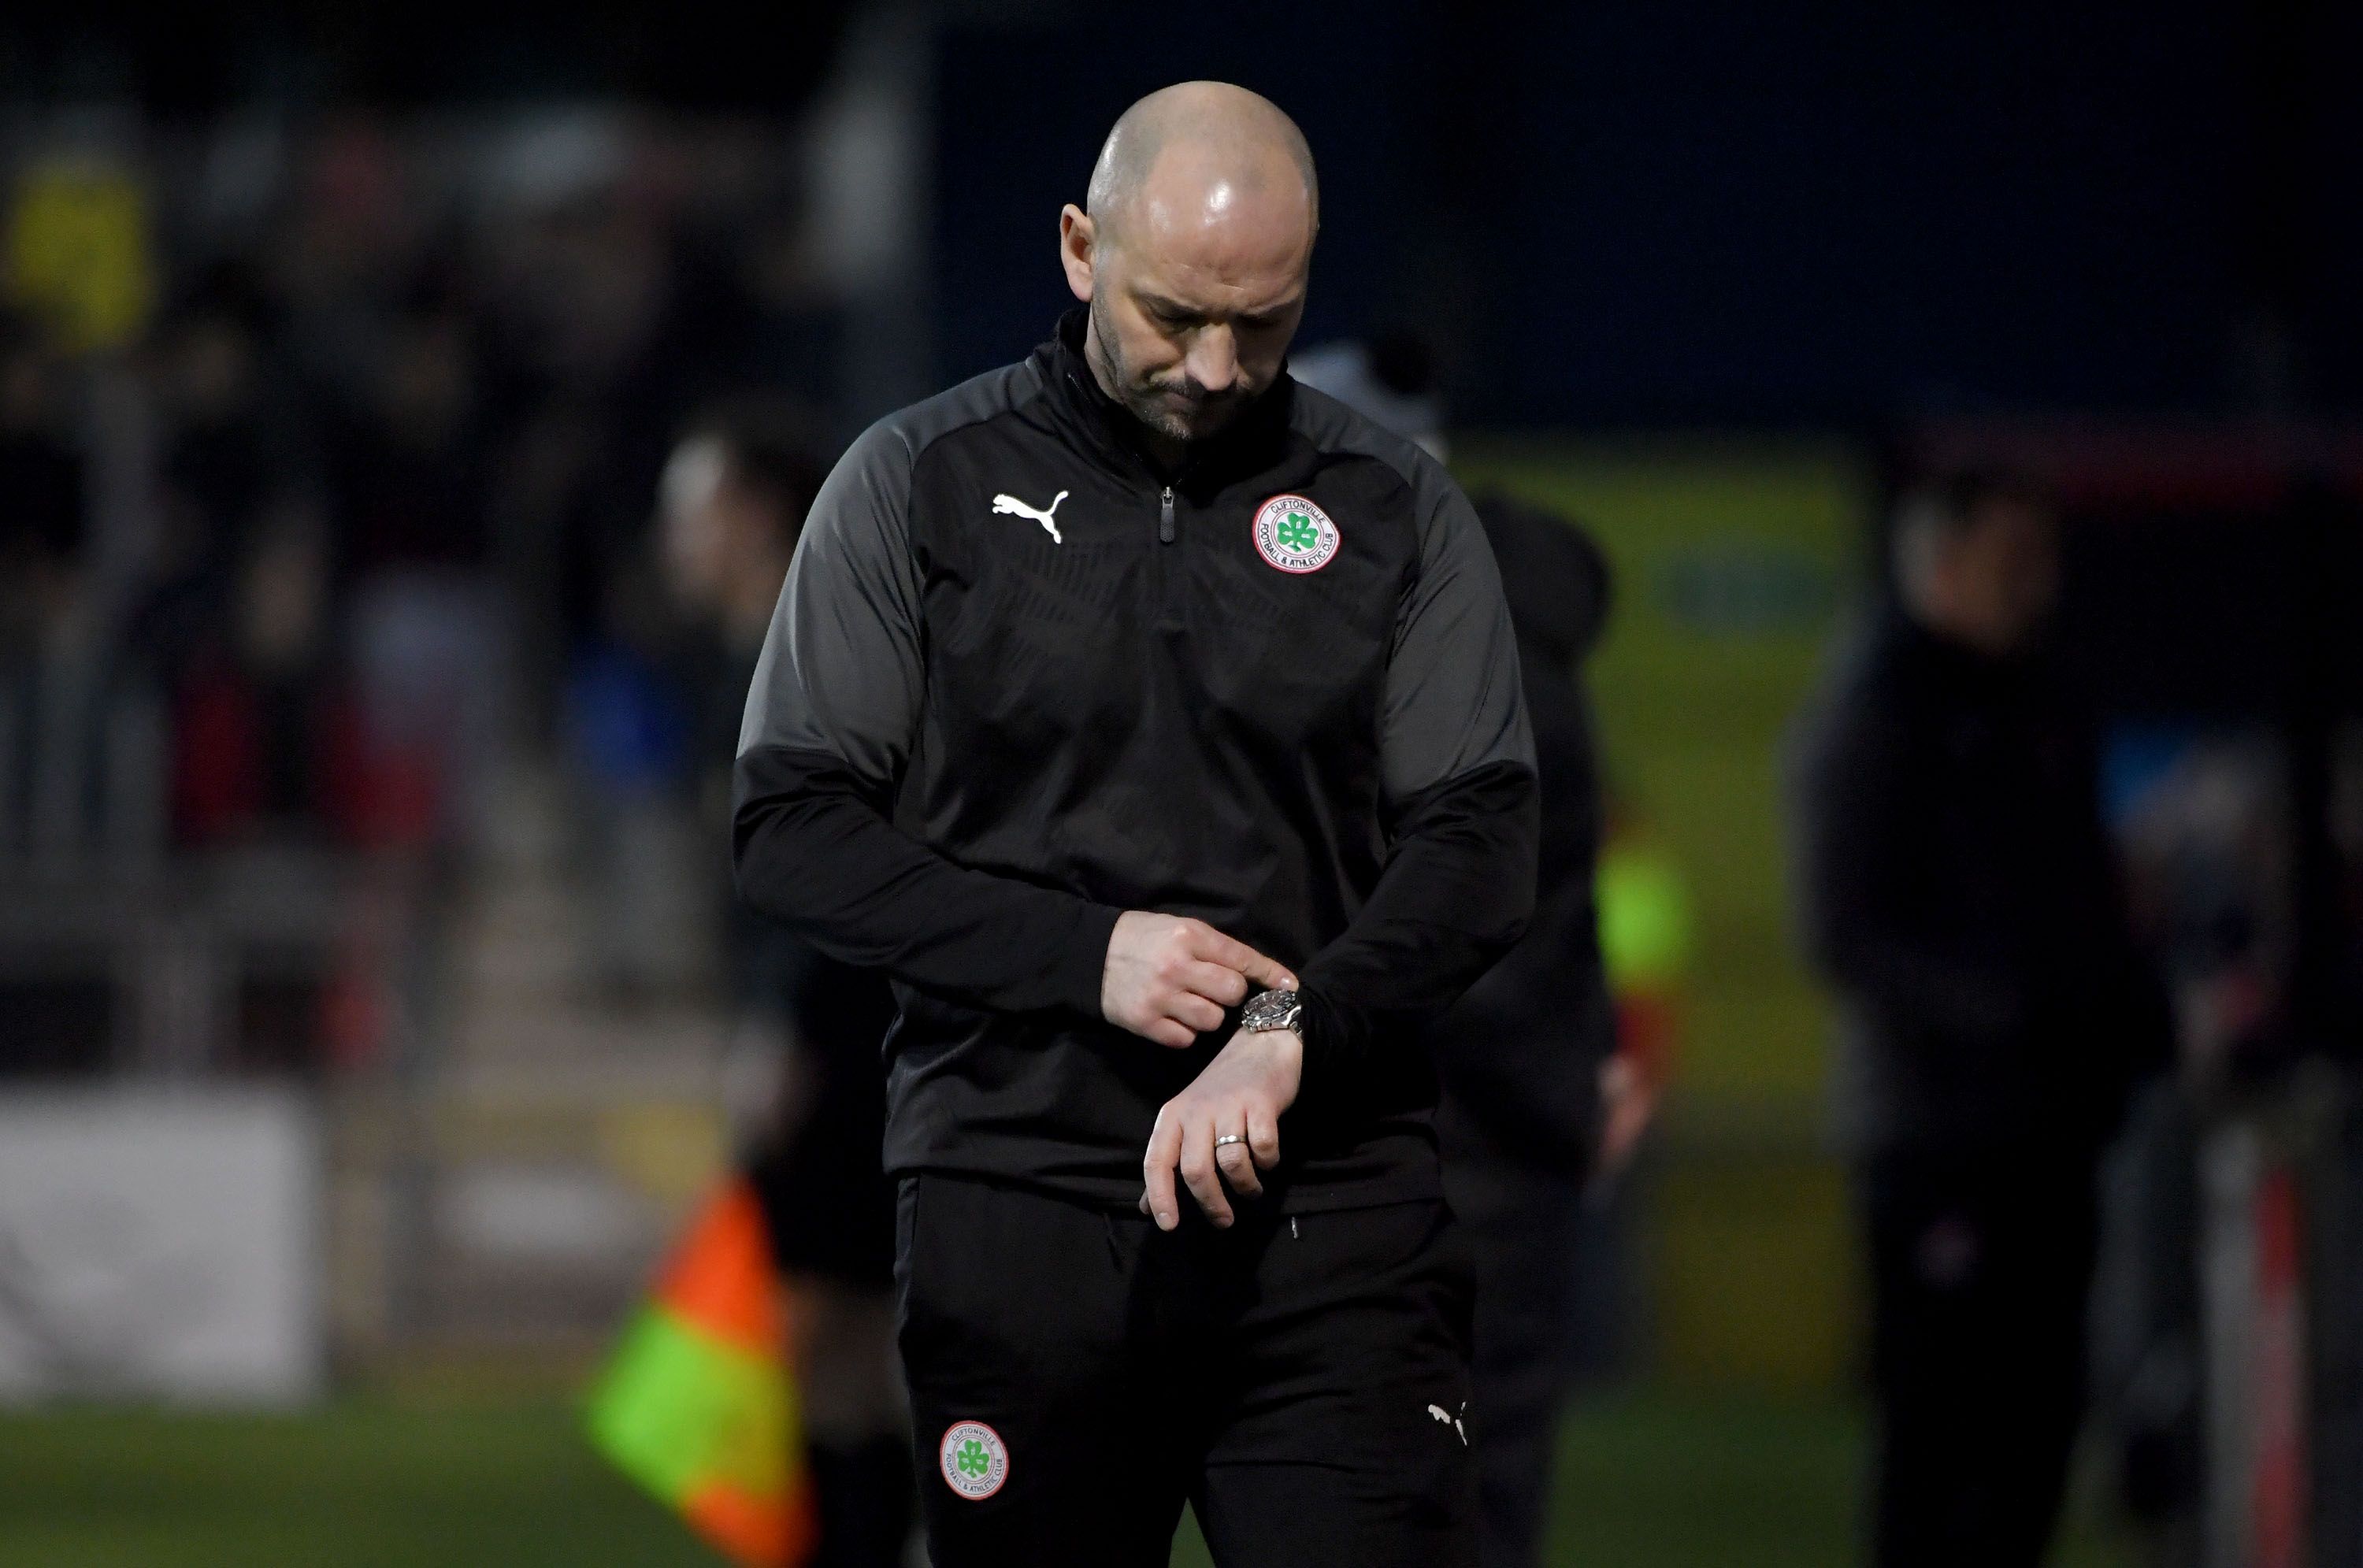 Cliftonville Paddy McLaughlin has challenged his players to turn things around after three successive defeats